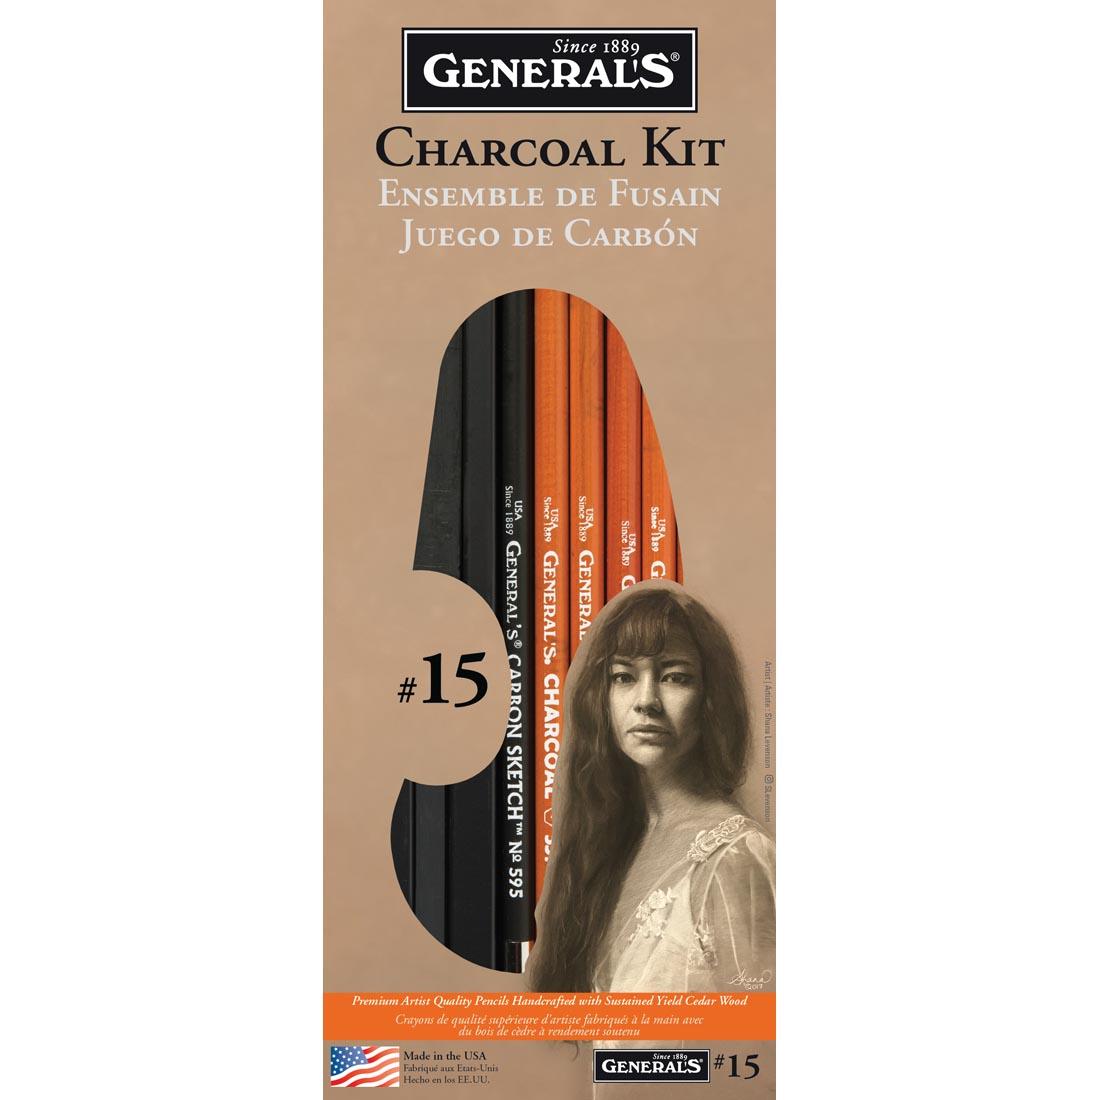 General's #15 Charcoal Kit